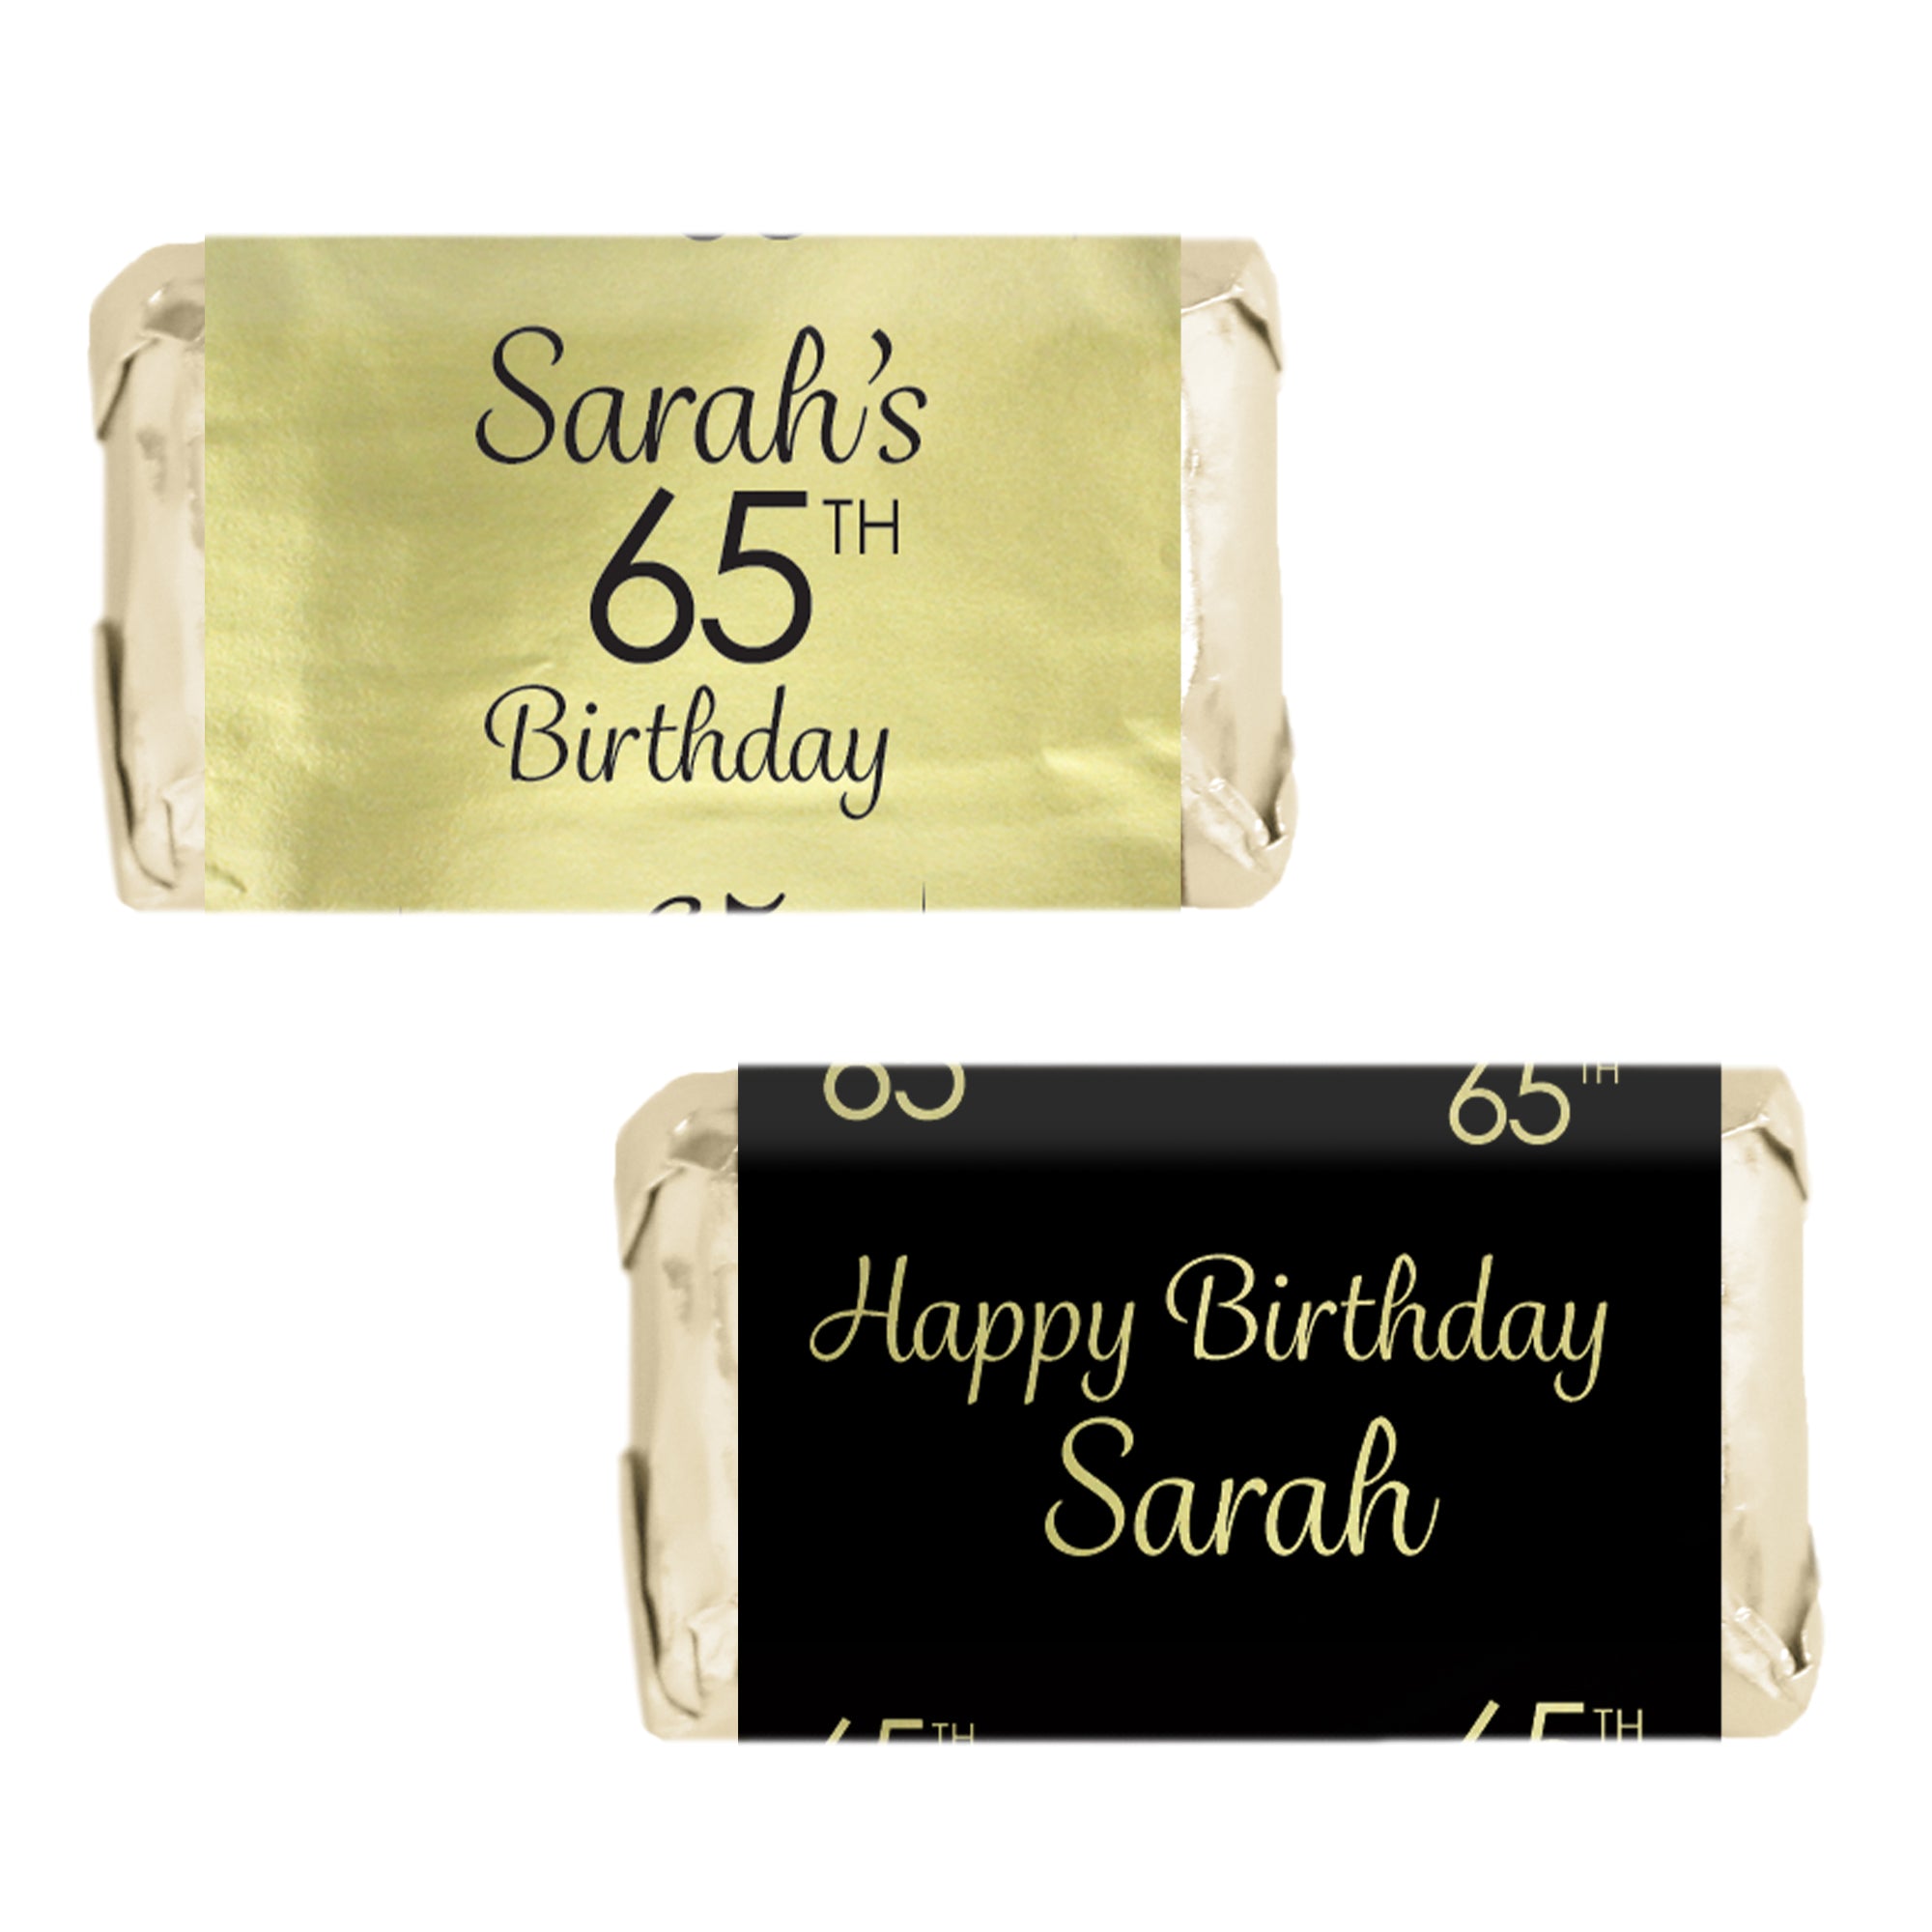 Personalized Black and Gold Birthday Mini Candy Bar Labels - Shiny Foil - 45 Stickers